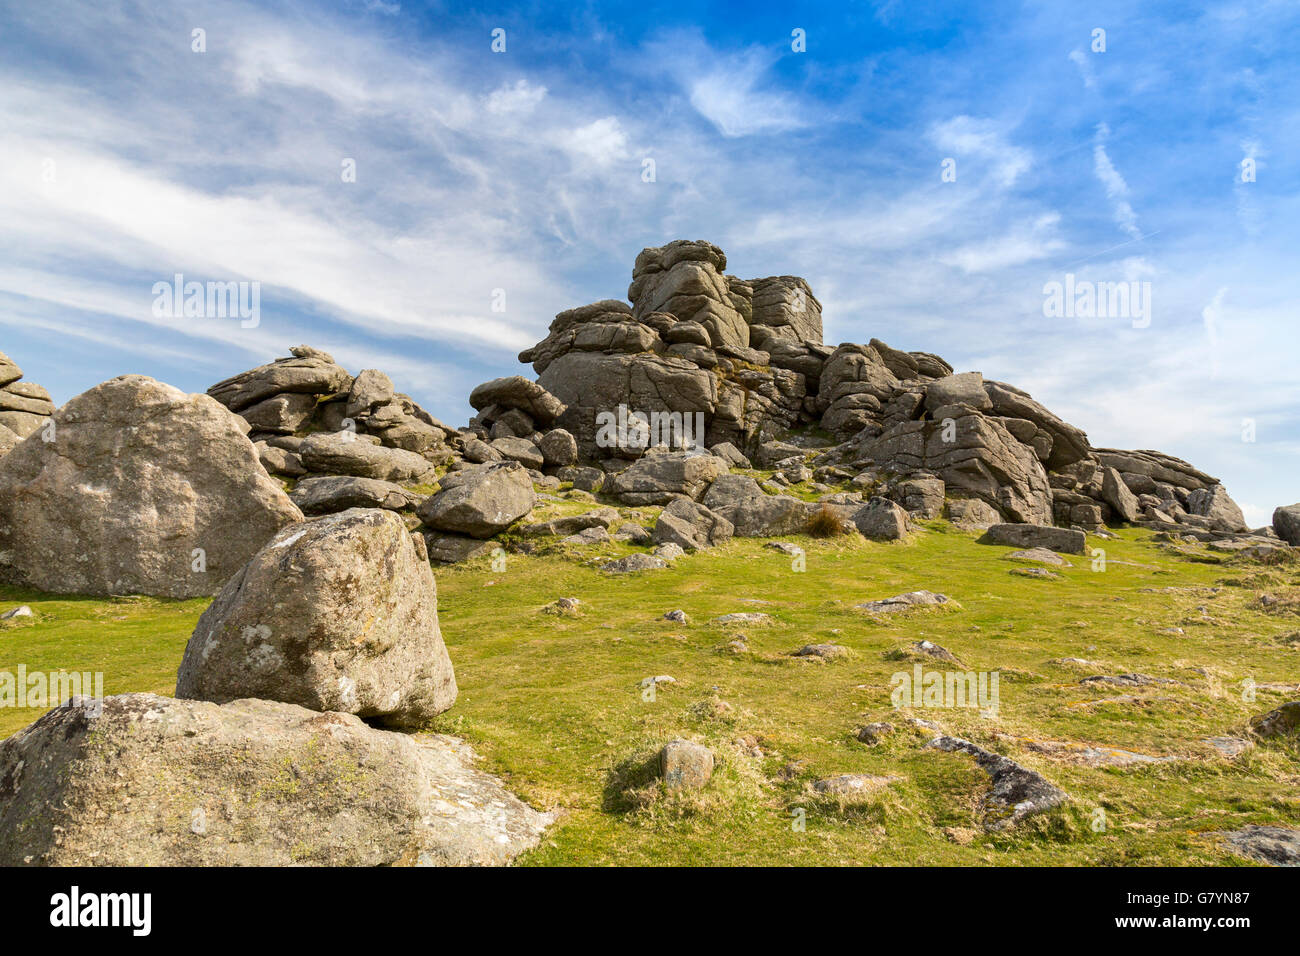 The granite of Hound Tor has been weathered by millions of years of wind, rain and frost on Dartmoor, Devon, England, UK Stock Photo